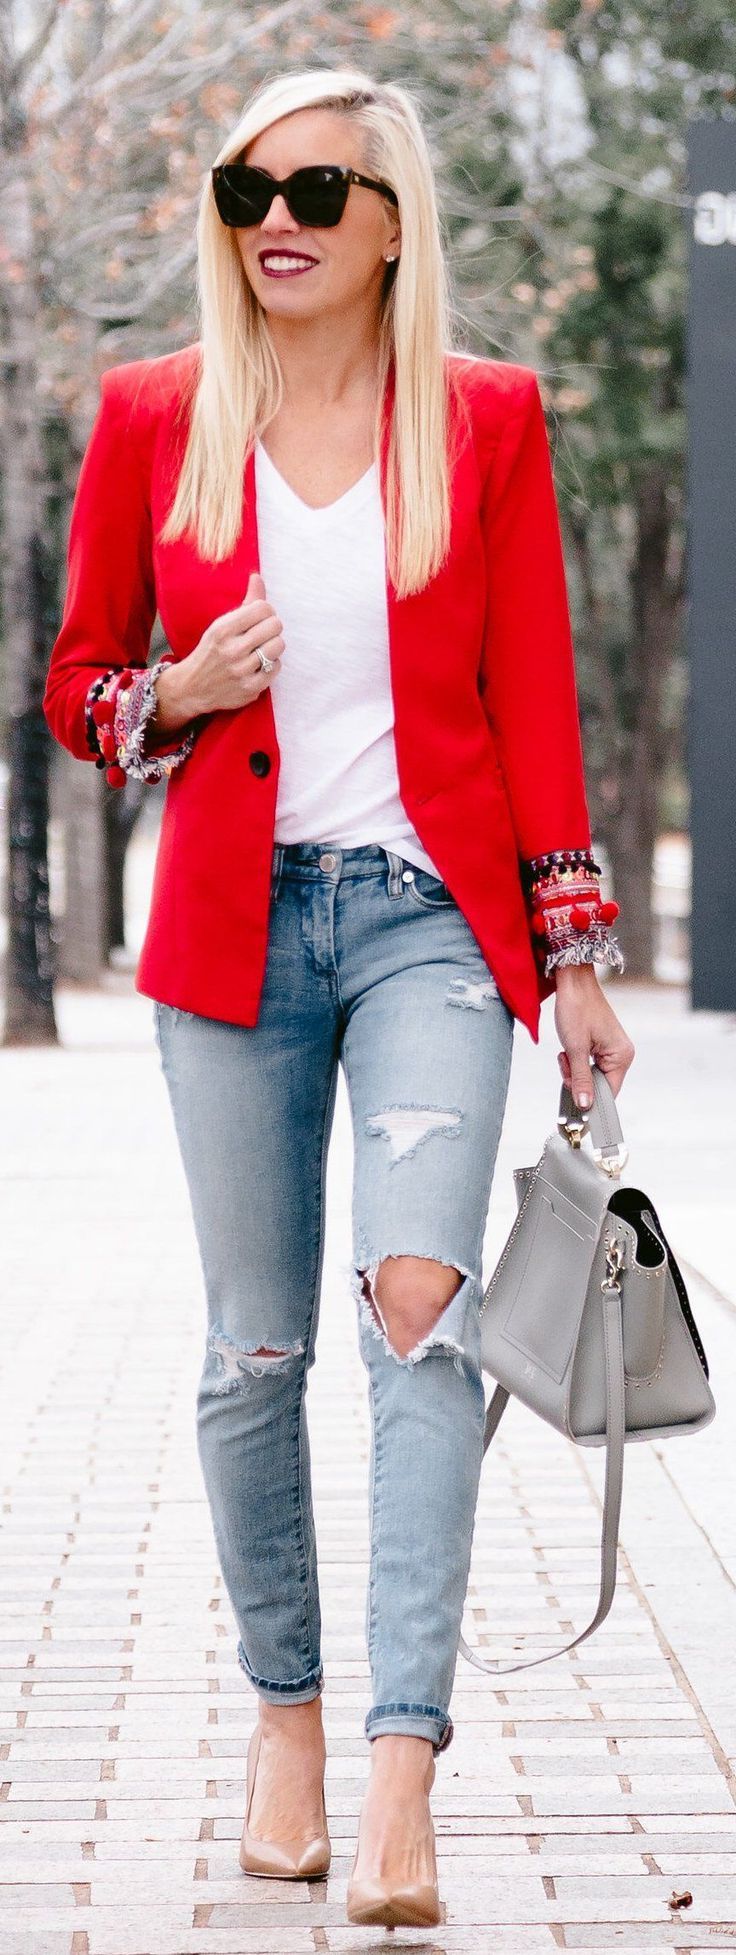 Blazers Outfit Ideas For Women 2019